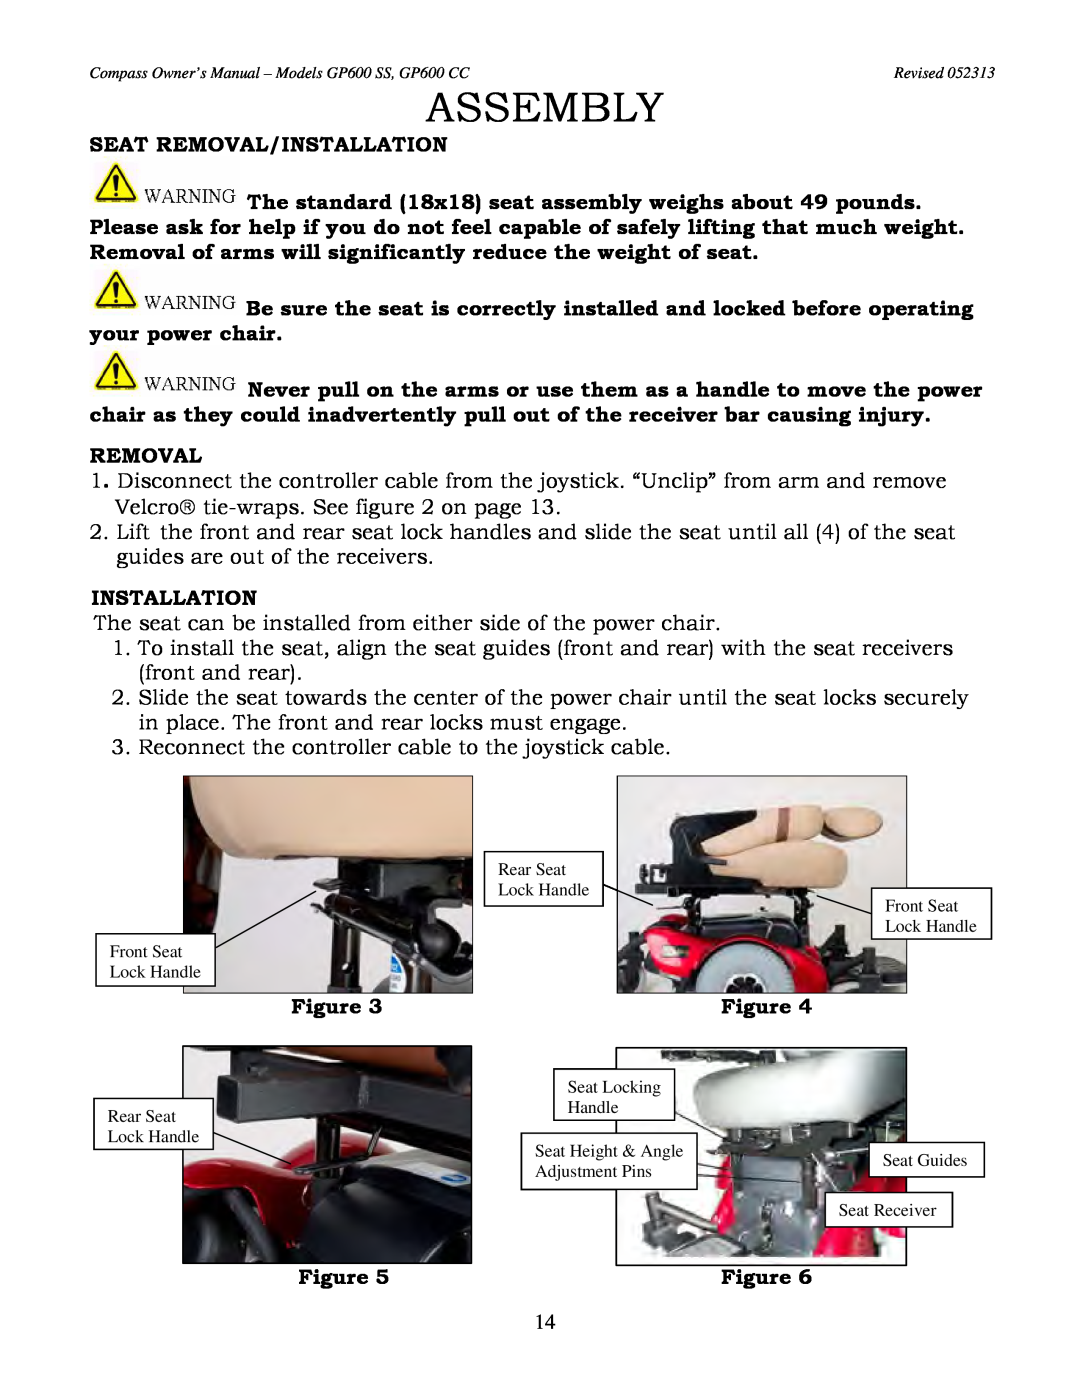 Golden Technologies GP600 SS, GP600 CC owner manual Assembly, Seat Removal/Installation 